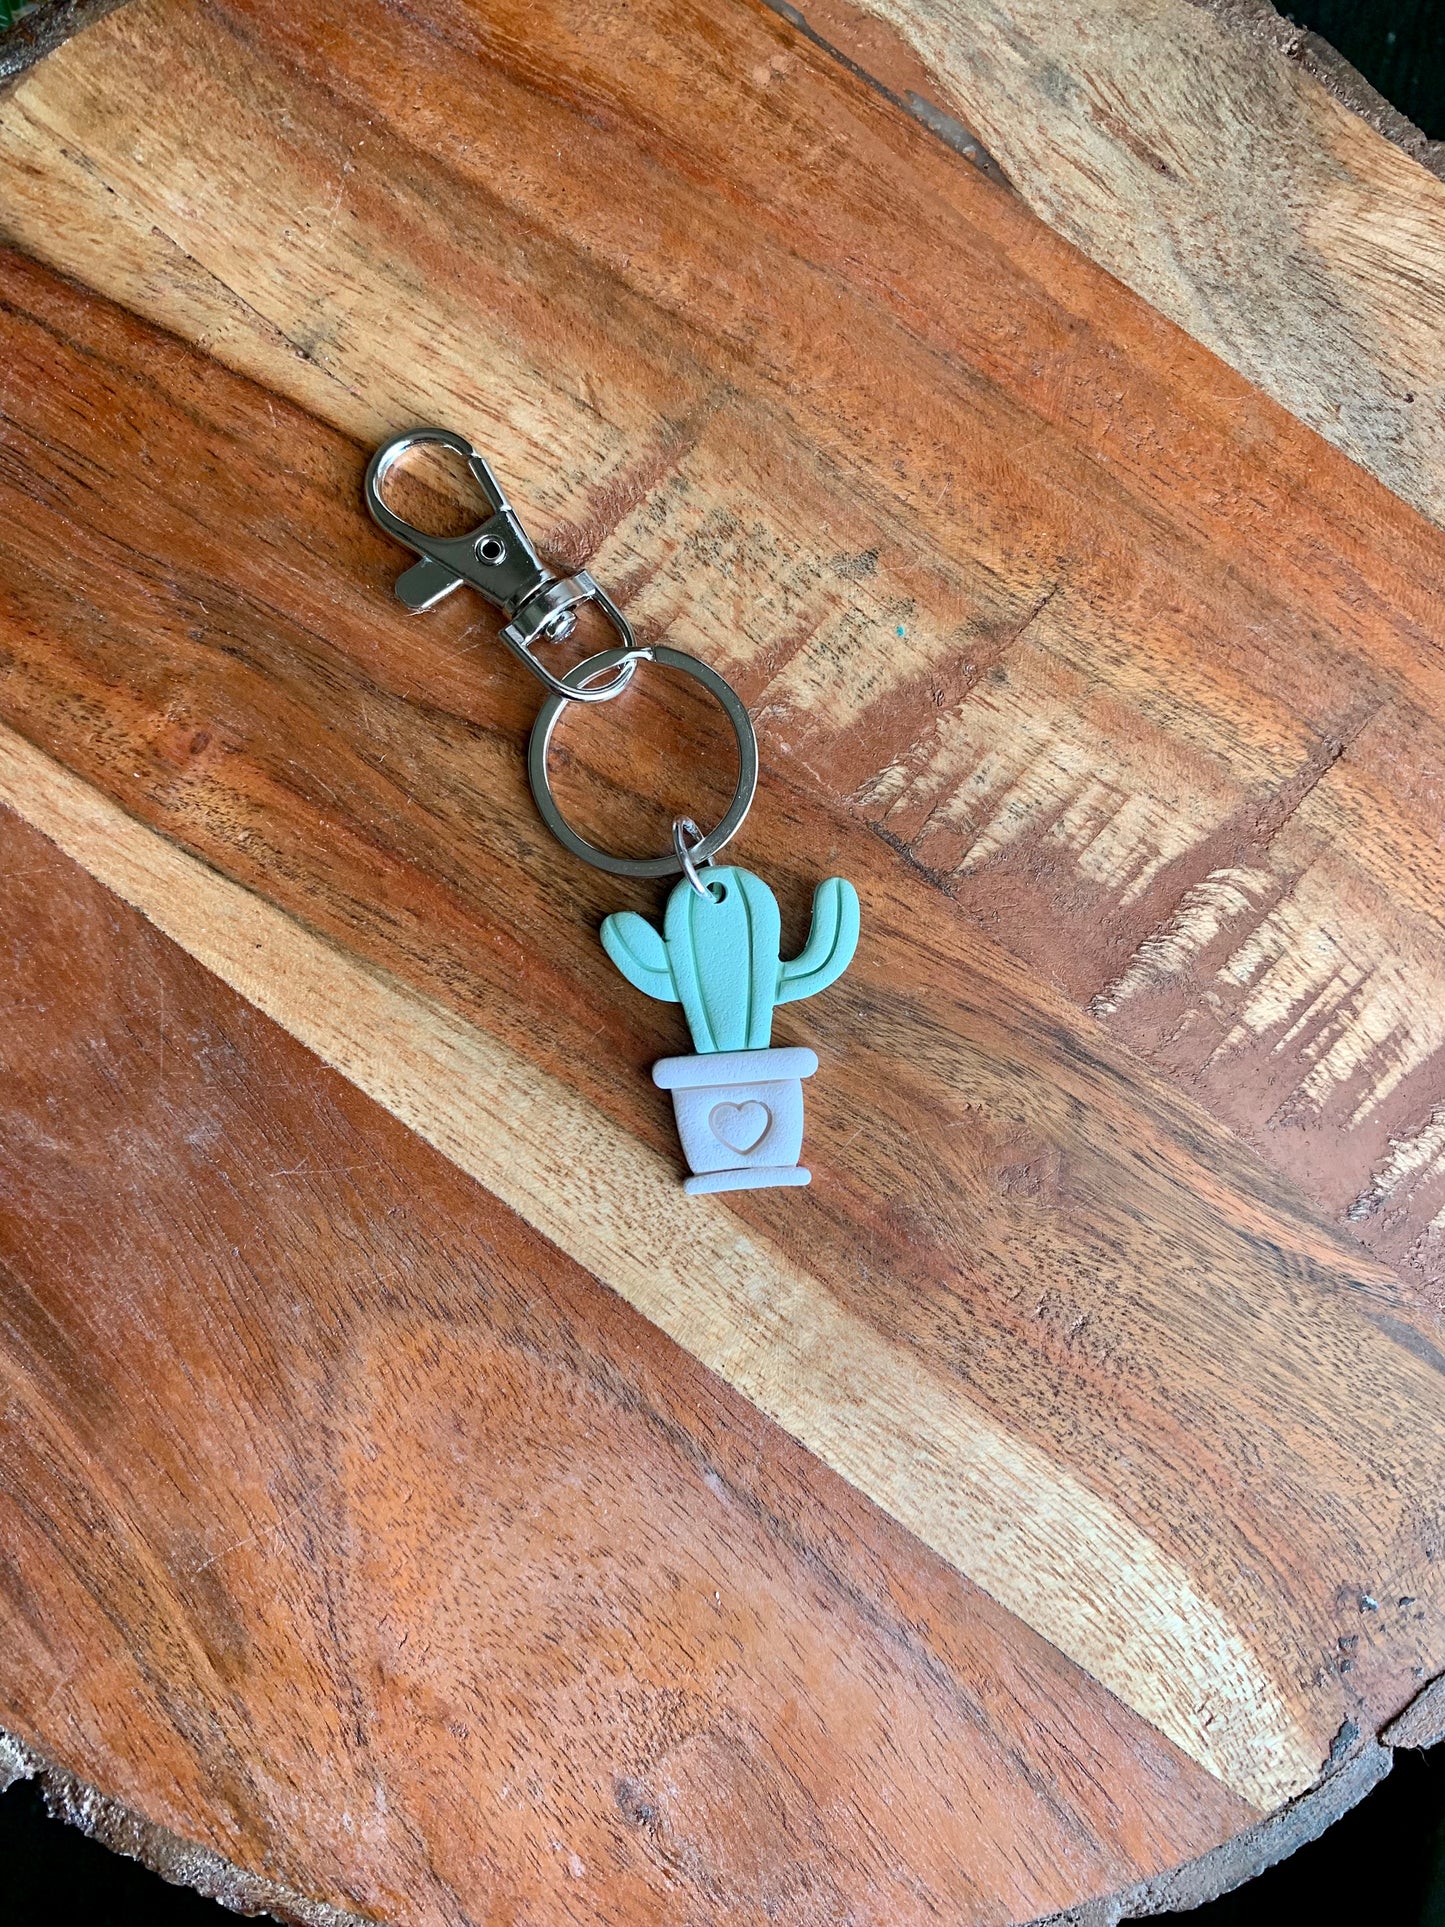 Potted Cactus Keychains